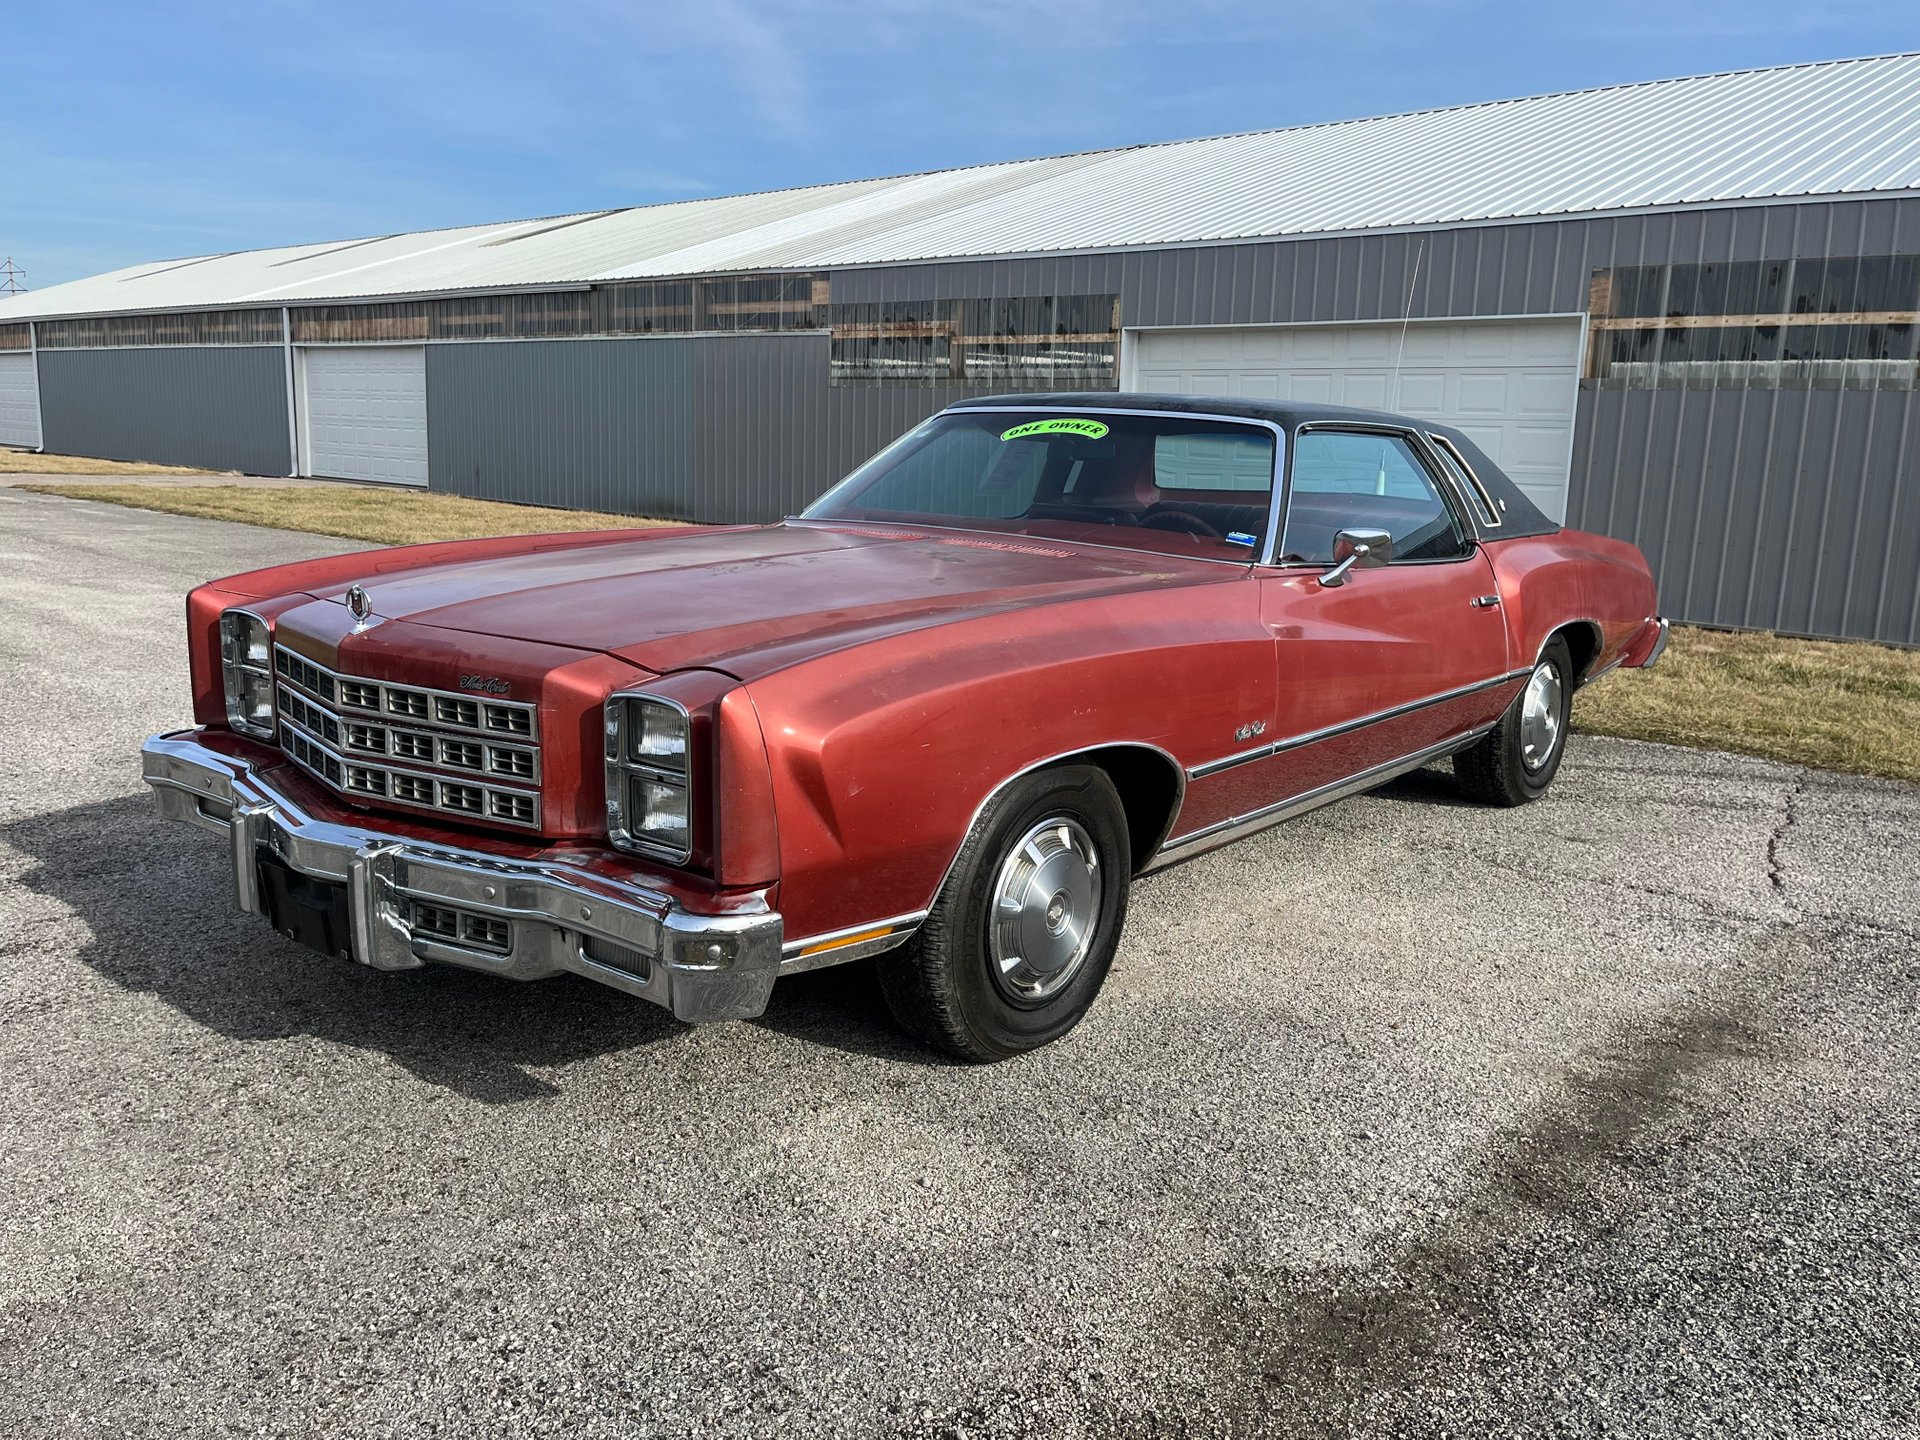 1977 Chevrolet Monte Carlo | Country Classic Cars